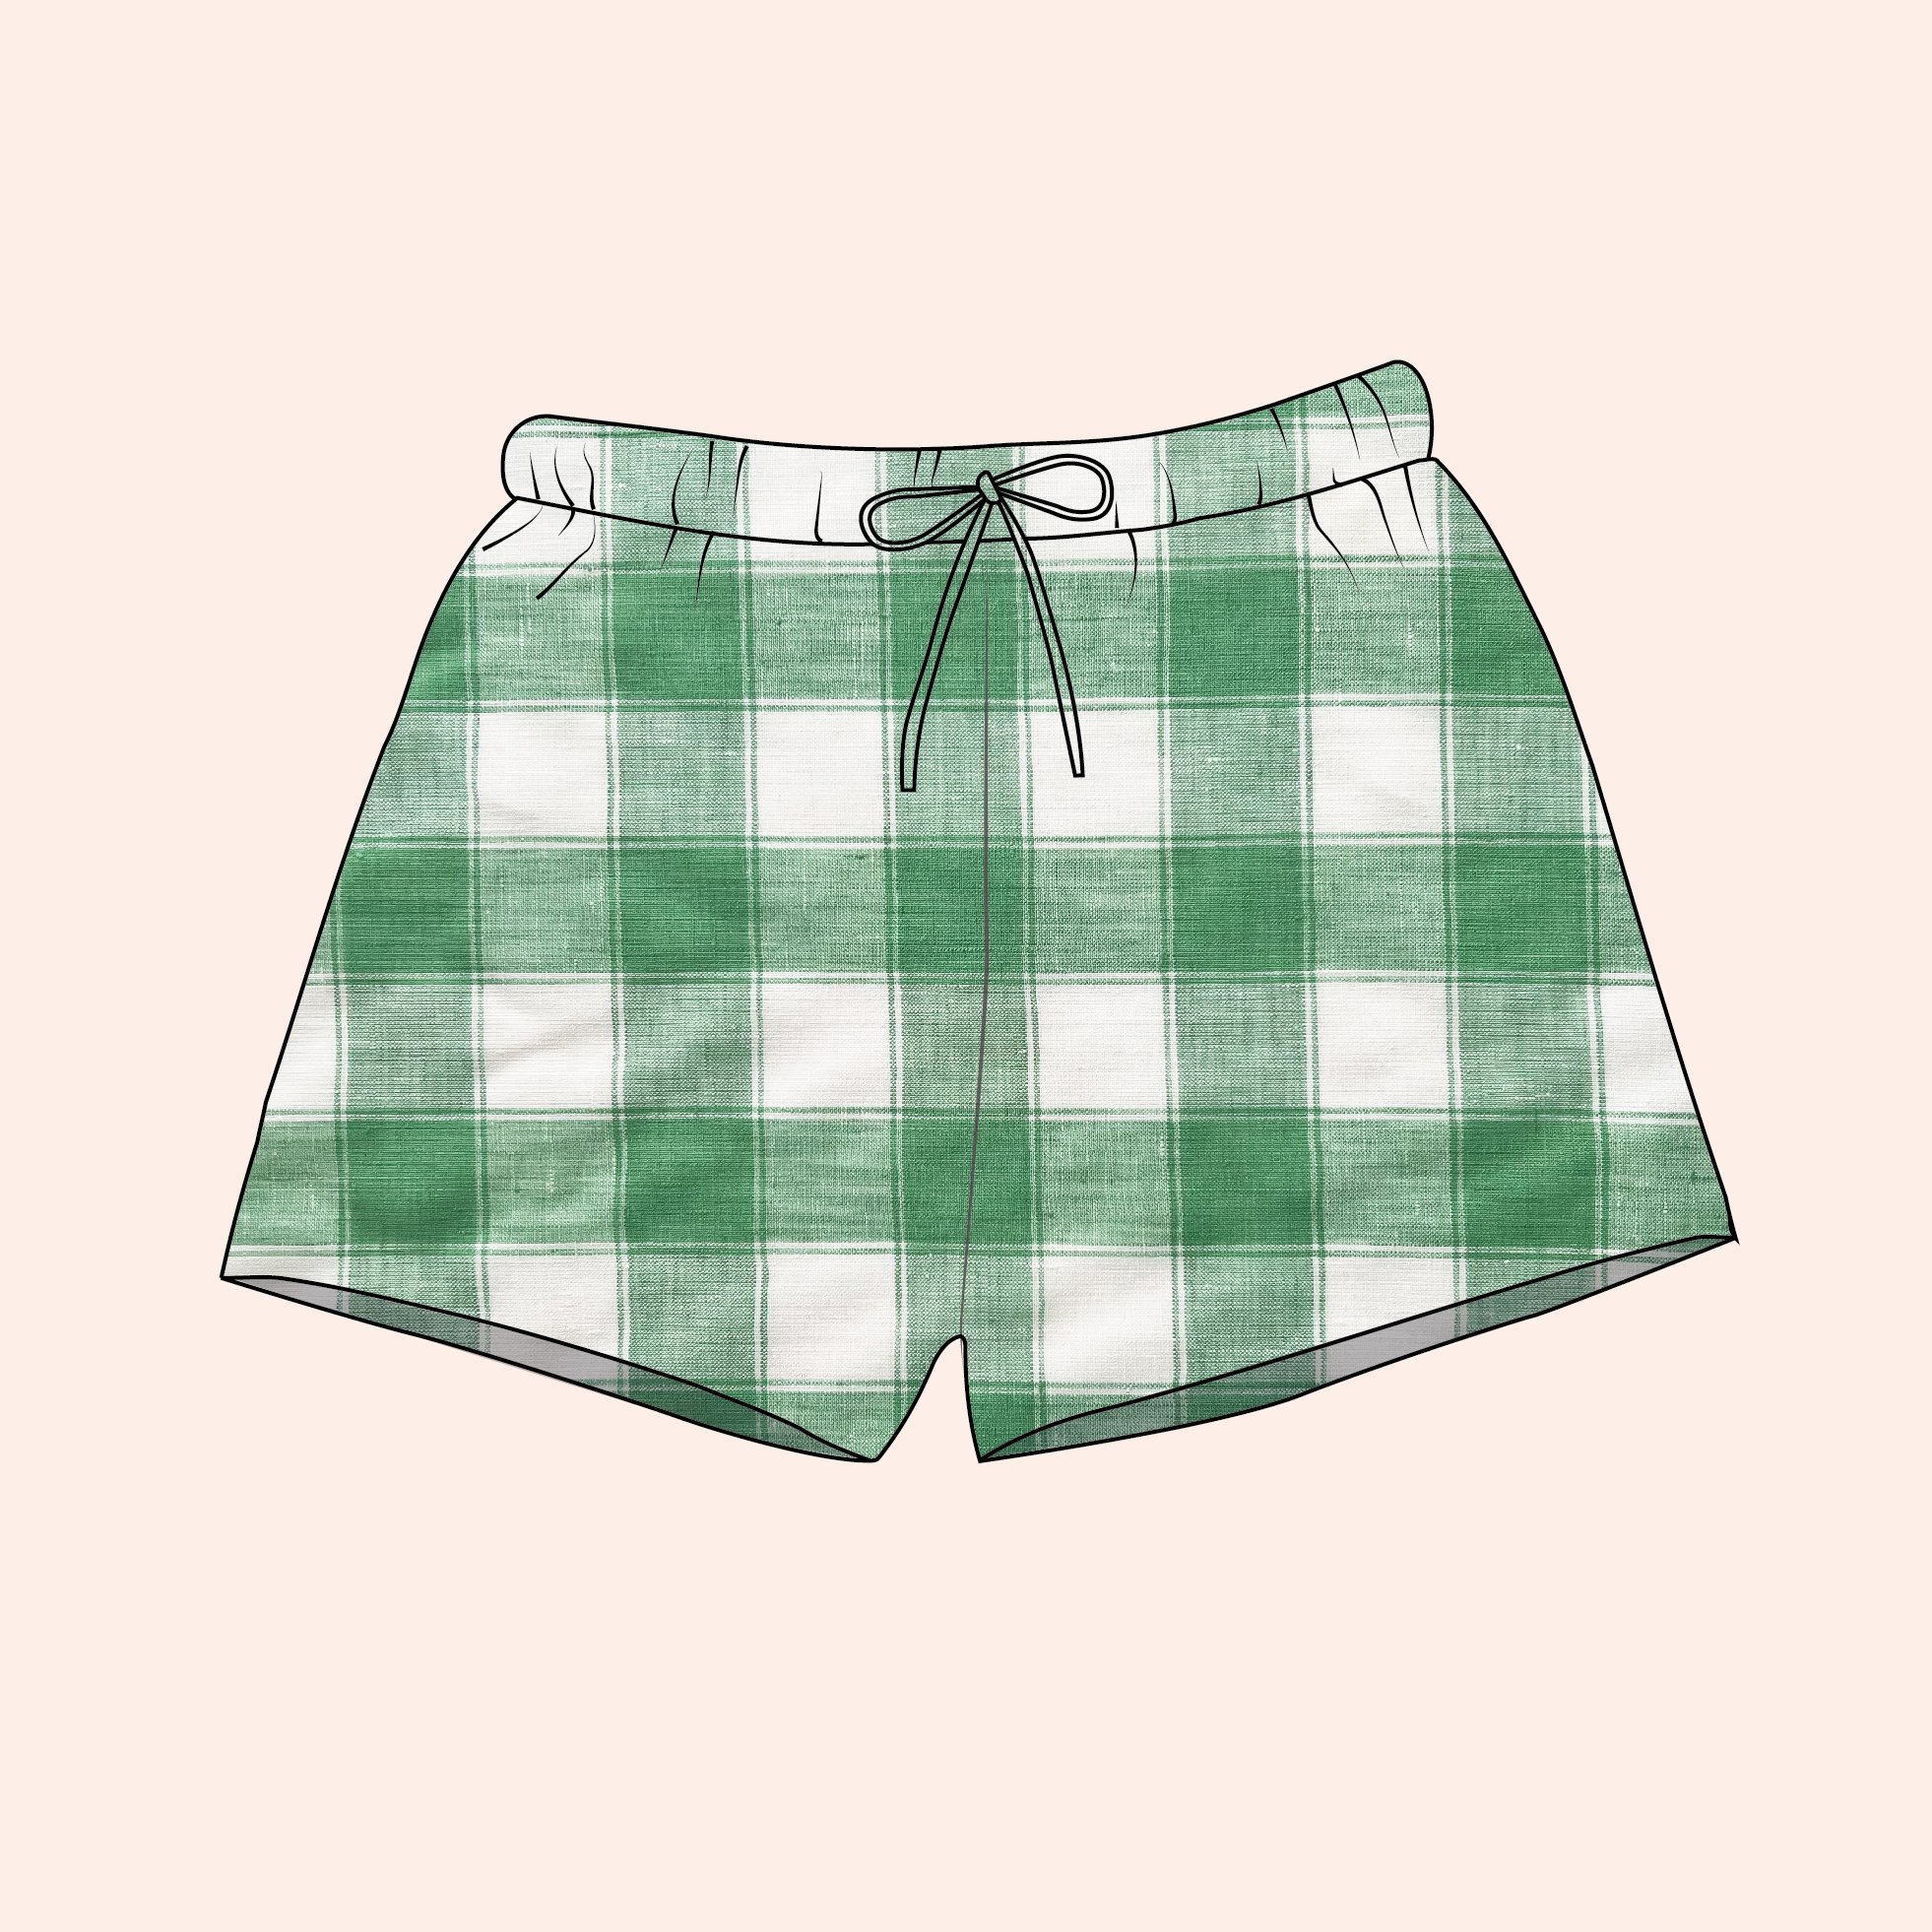 Shorts illustrations with mint check.jpg